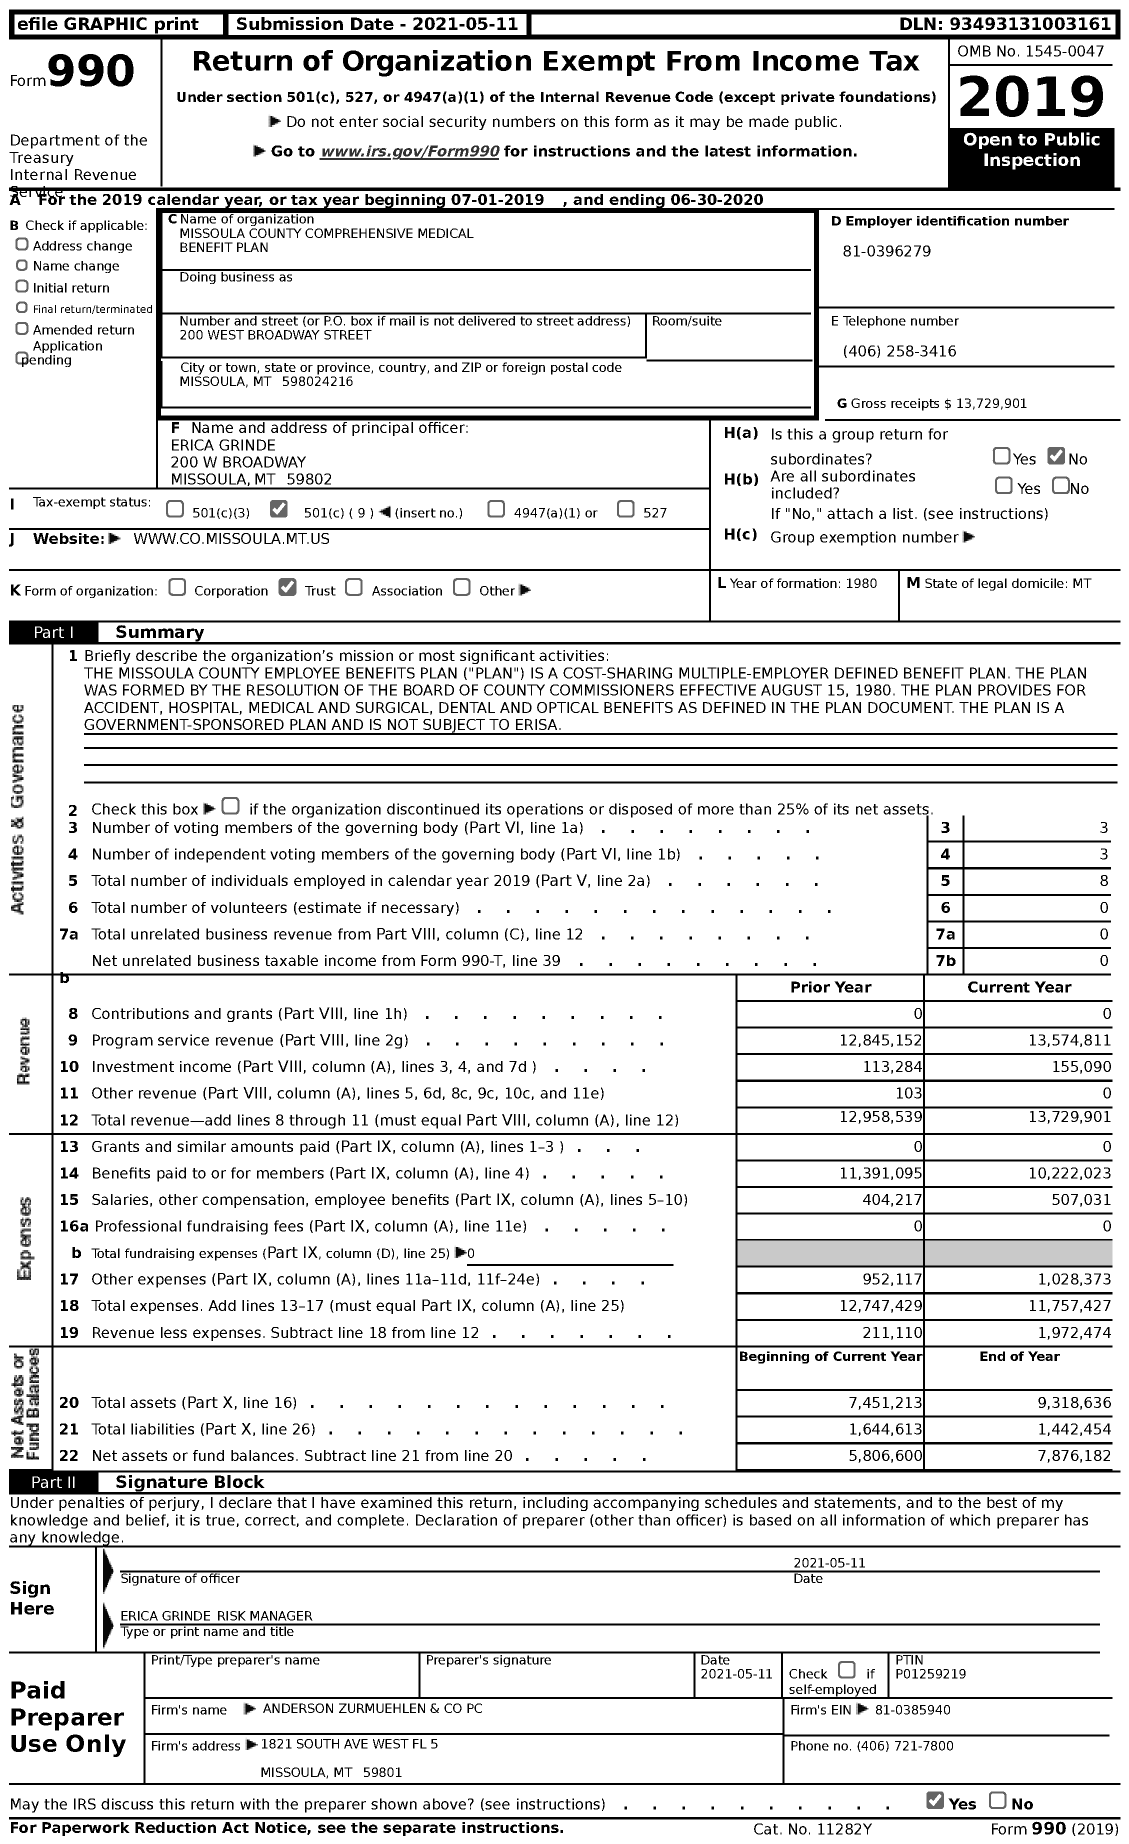 Image of first page of 2019 Form 990 for Missoula County Comprehensive Medical Benefit Plan